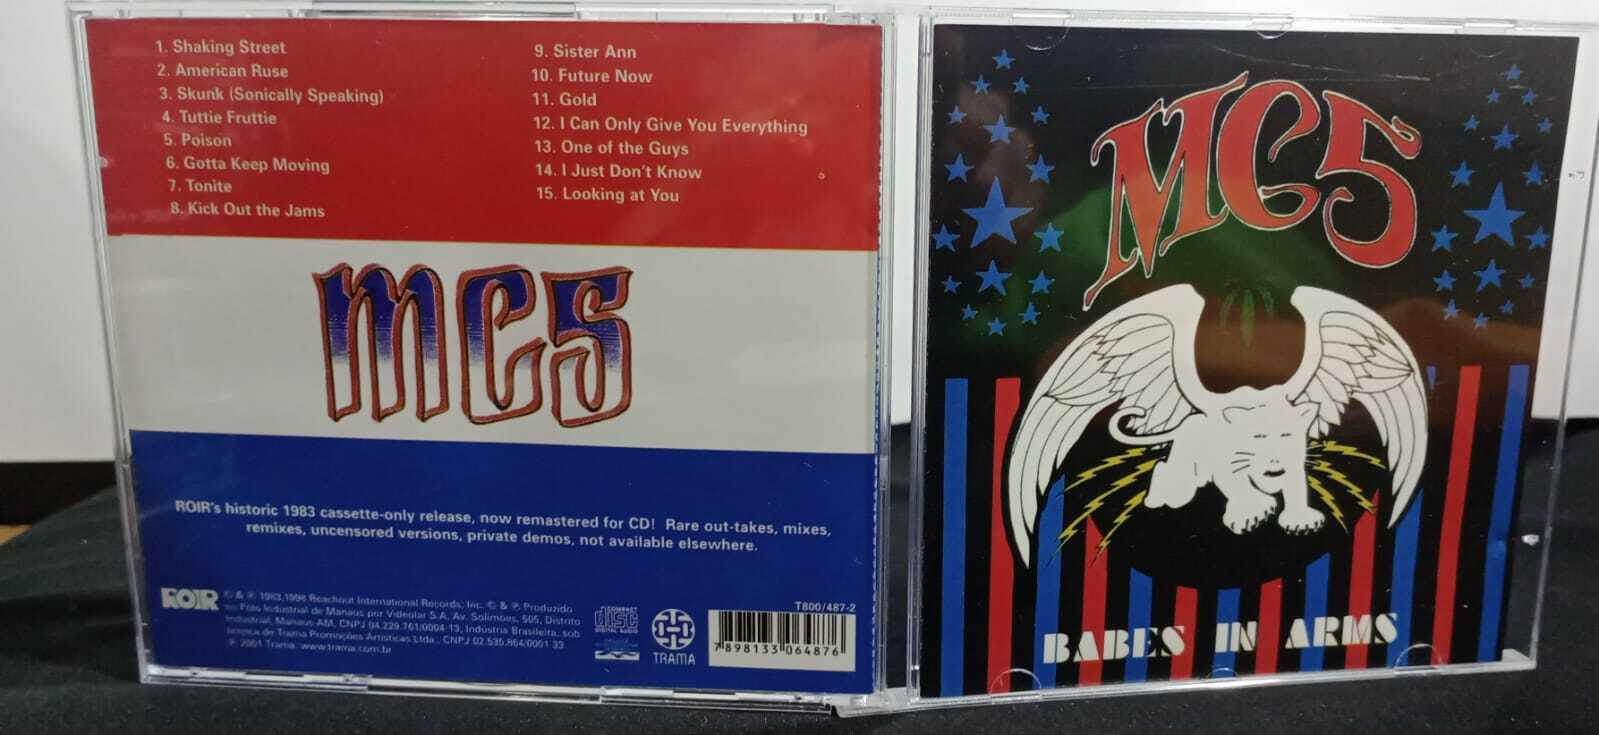 CD - MC5 - Babes In Arms